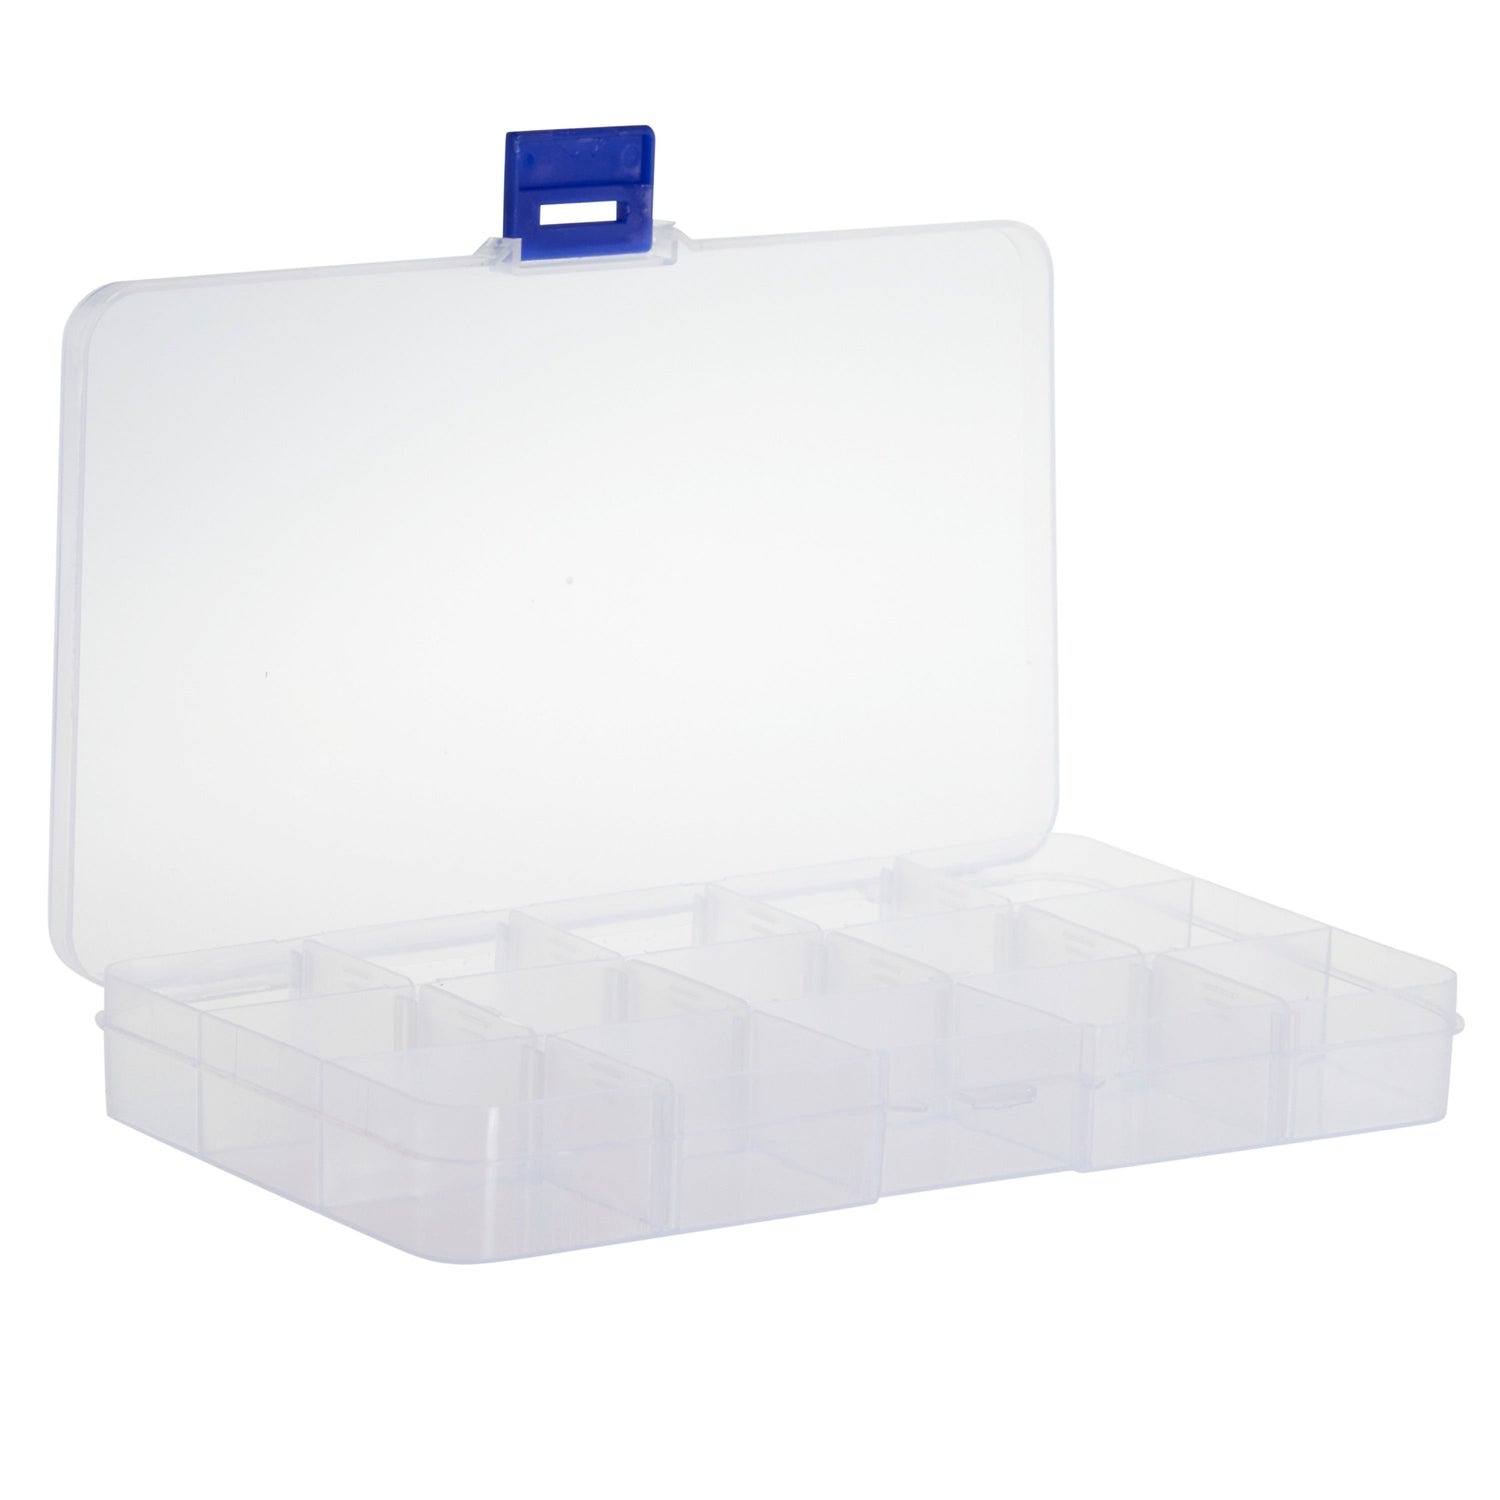 3-Tier Plastic Craft Storage Containers with 30 Compartments, 40 Sticker Labels (9.5 x 6.5 x 7.2 inch)